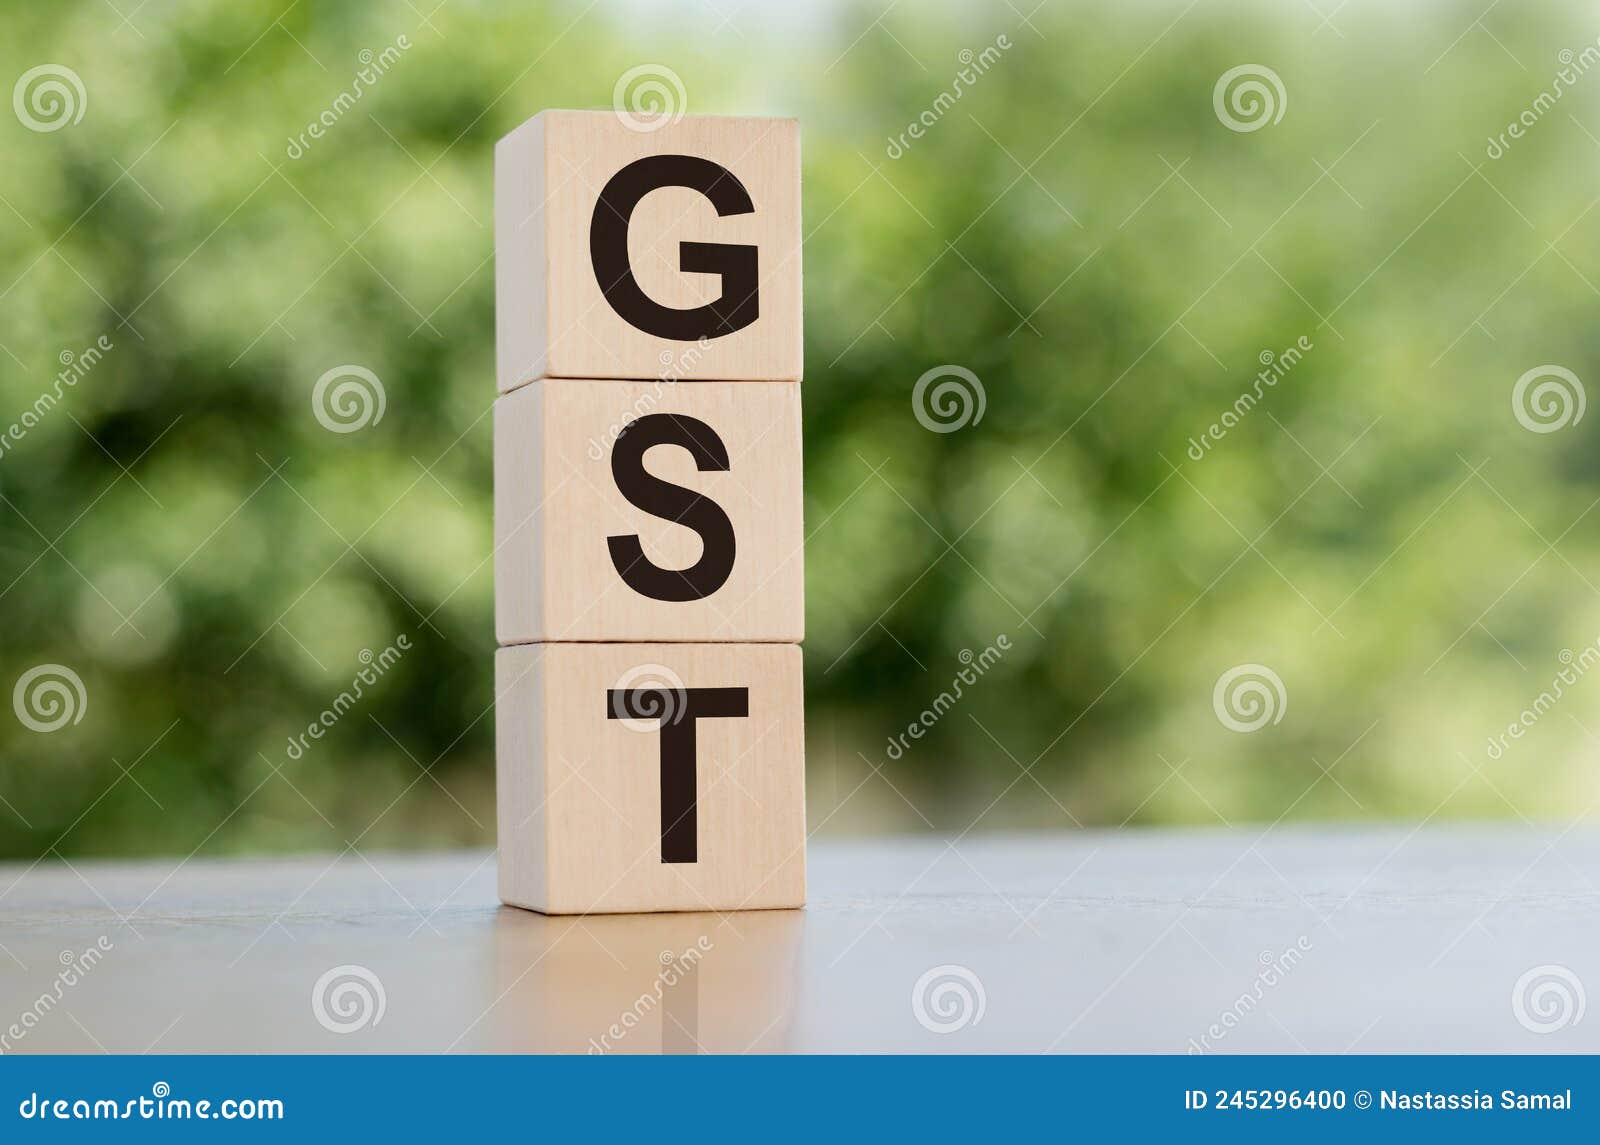 GST Returns: Understanding the Frequency of Filings